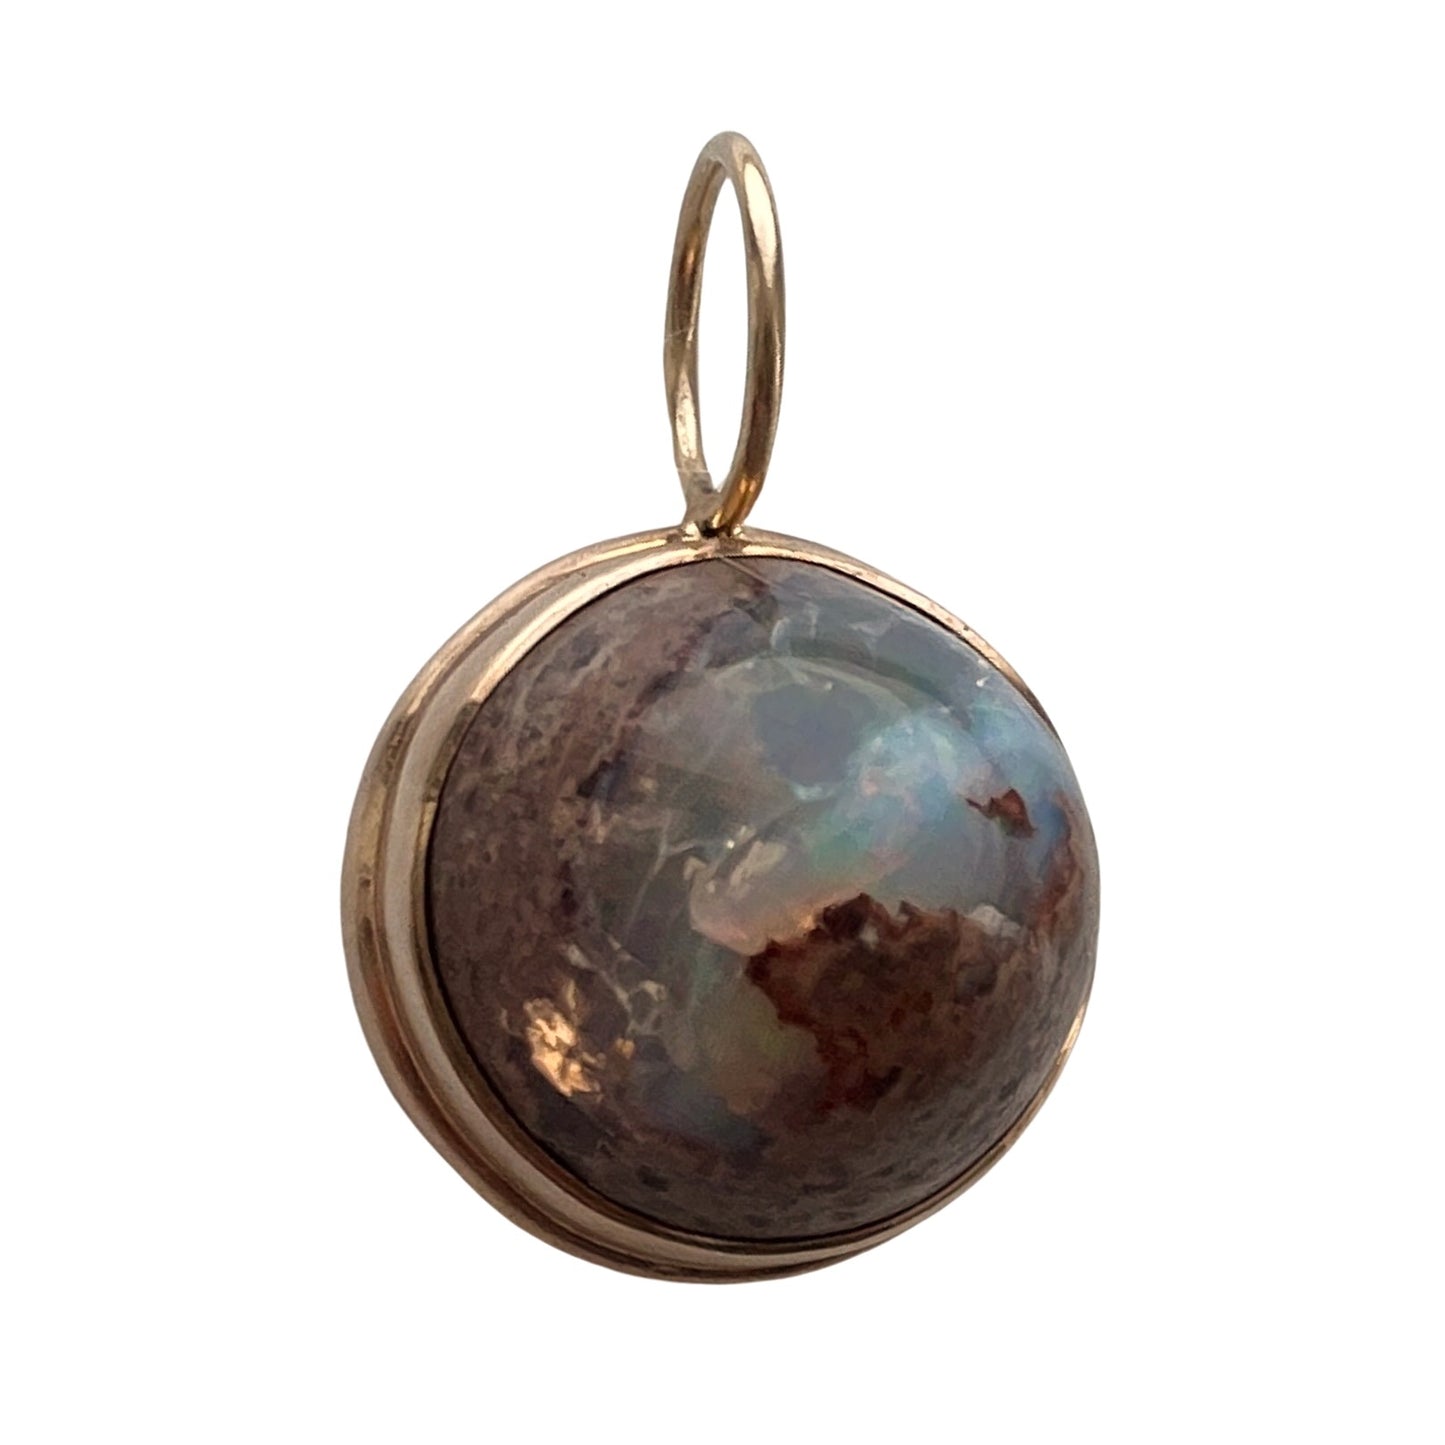 reimagined V I N T A G E // captured universe / boulder opal in 10 rosy yellow gold with a 14k gold bail / pendant